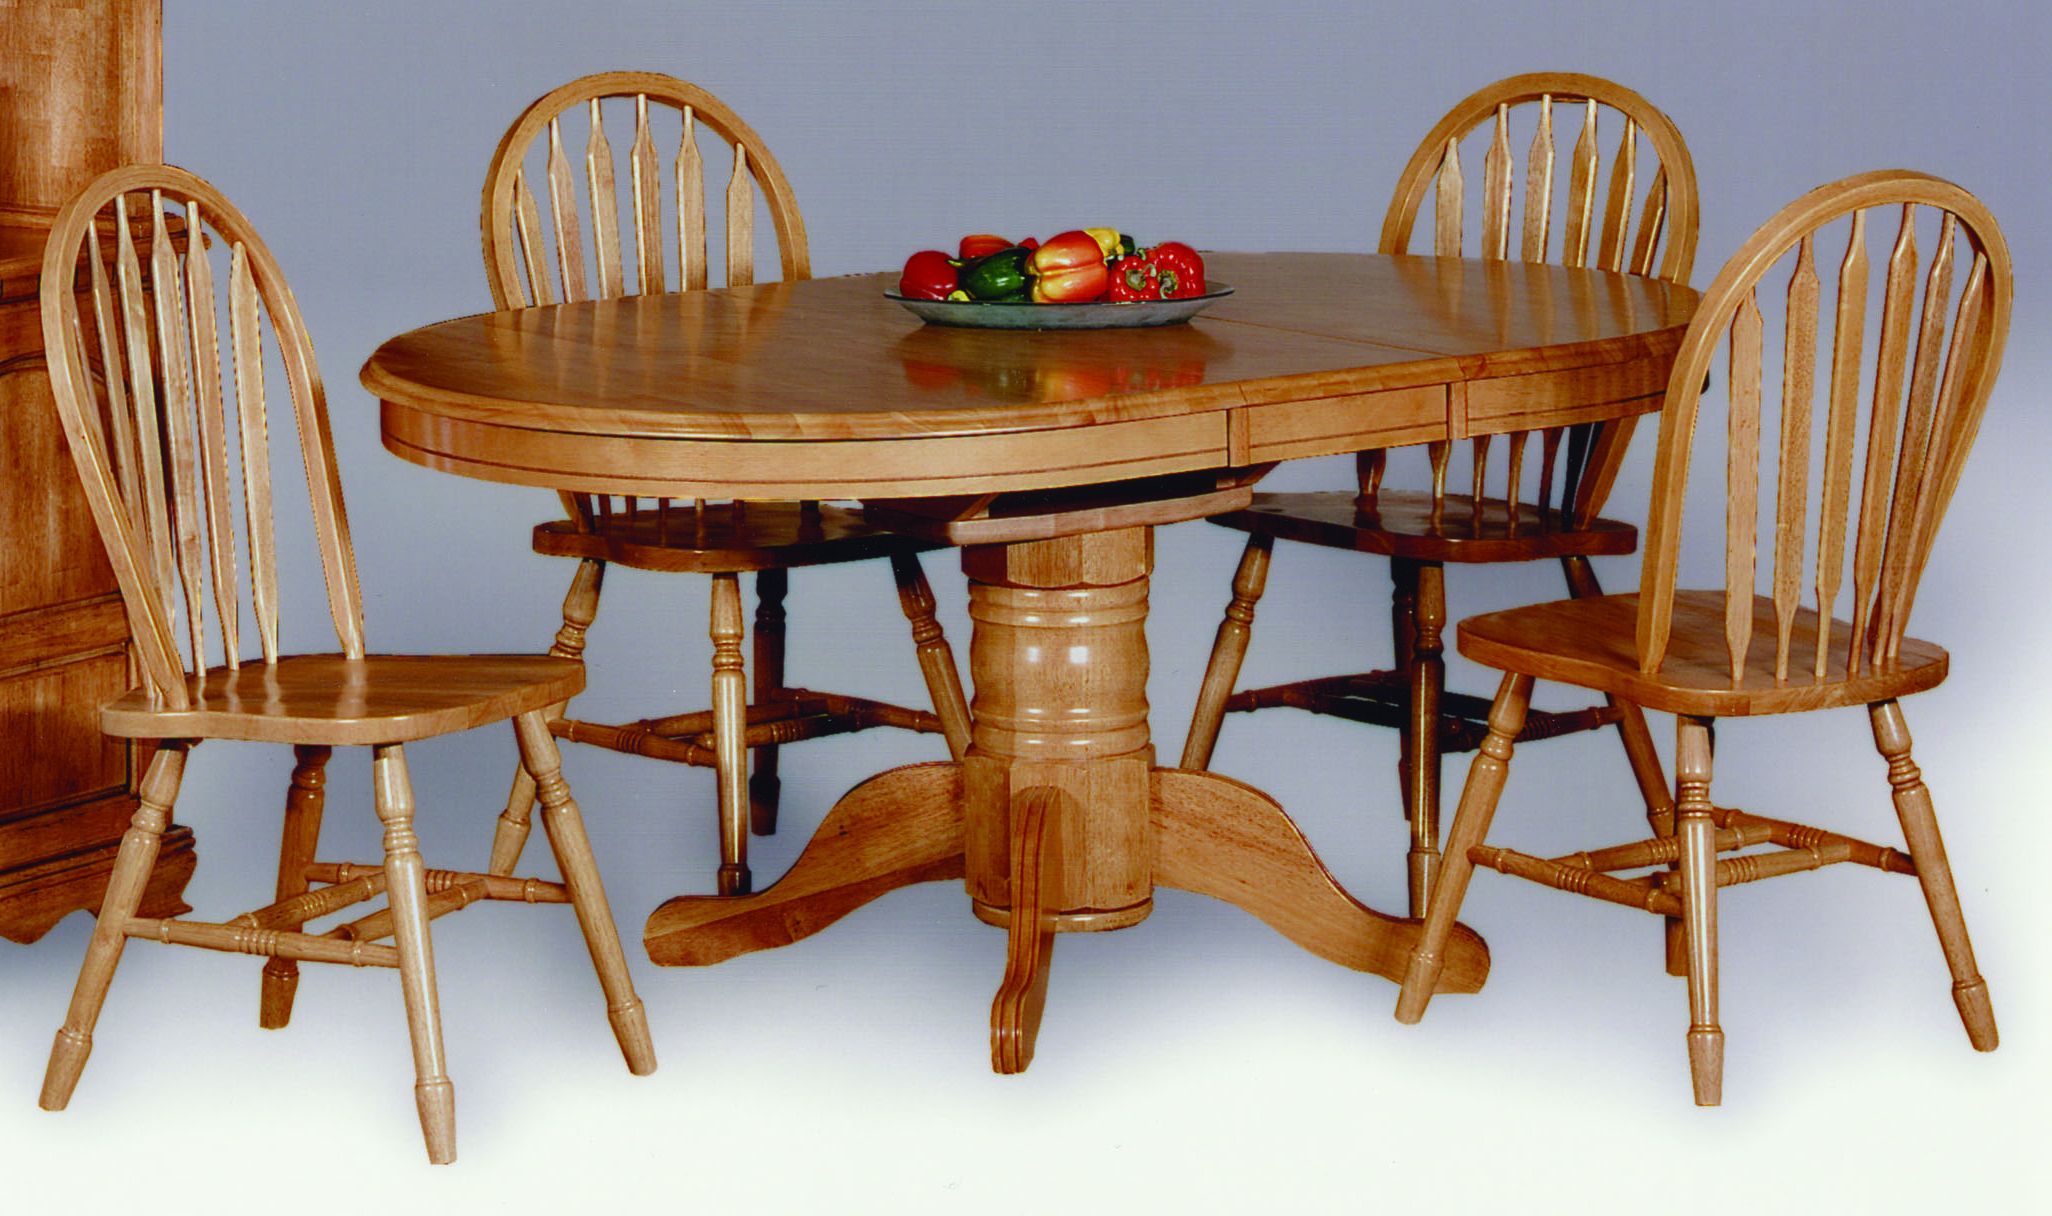 Well Known Round Dining Table For 6 With Leaf – Ideas On Foter For Round Pedestal Dining Tables With One Leaf (View 18 of 20)